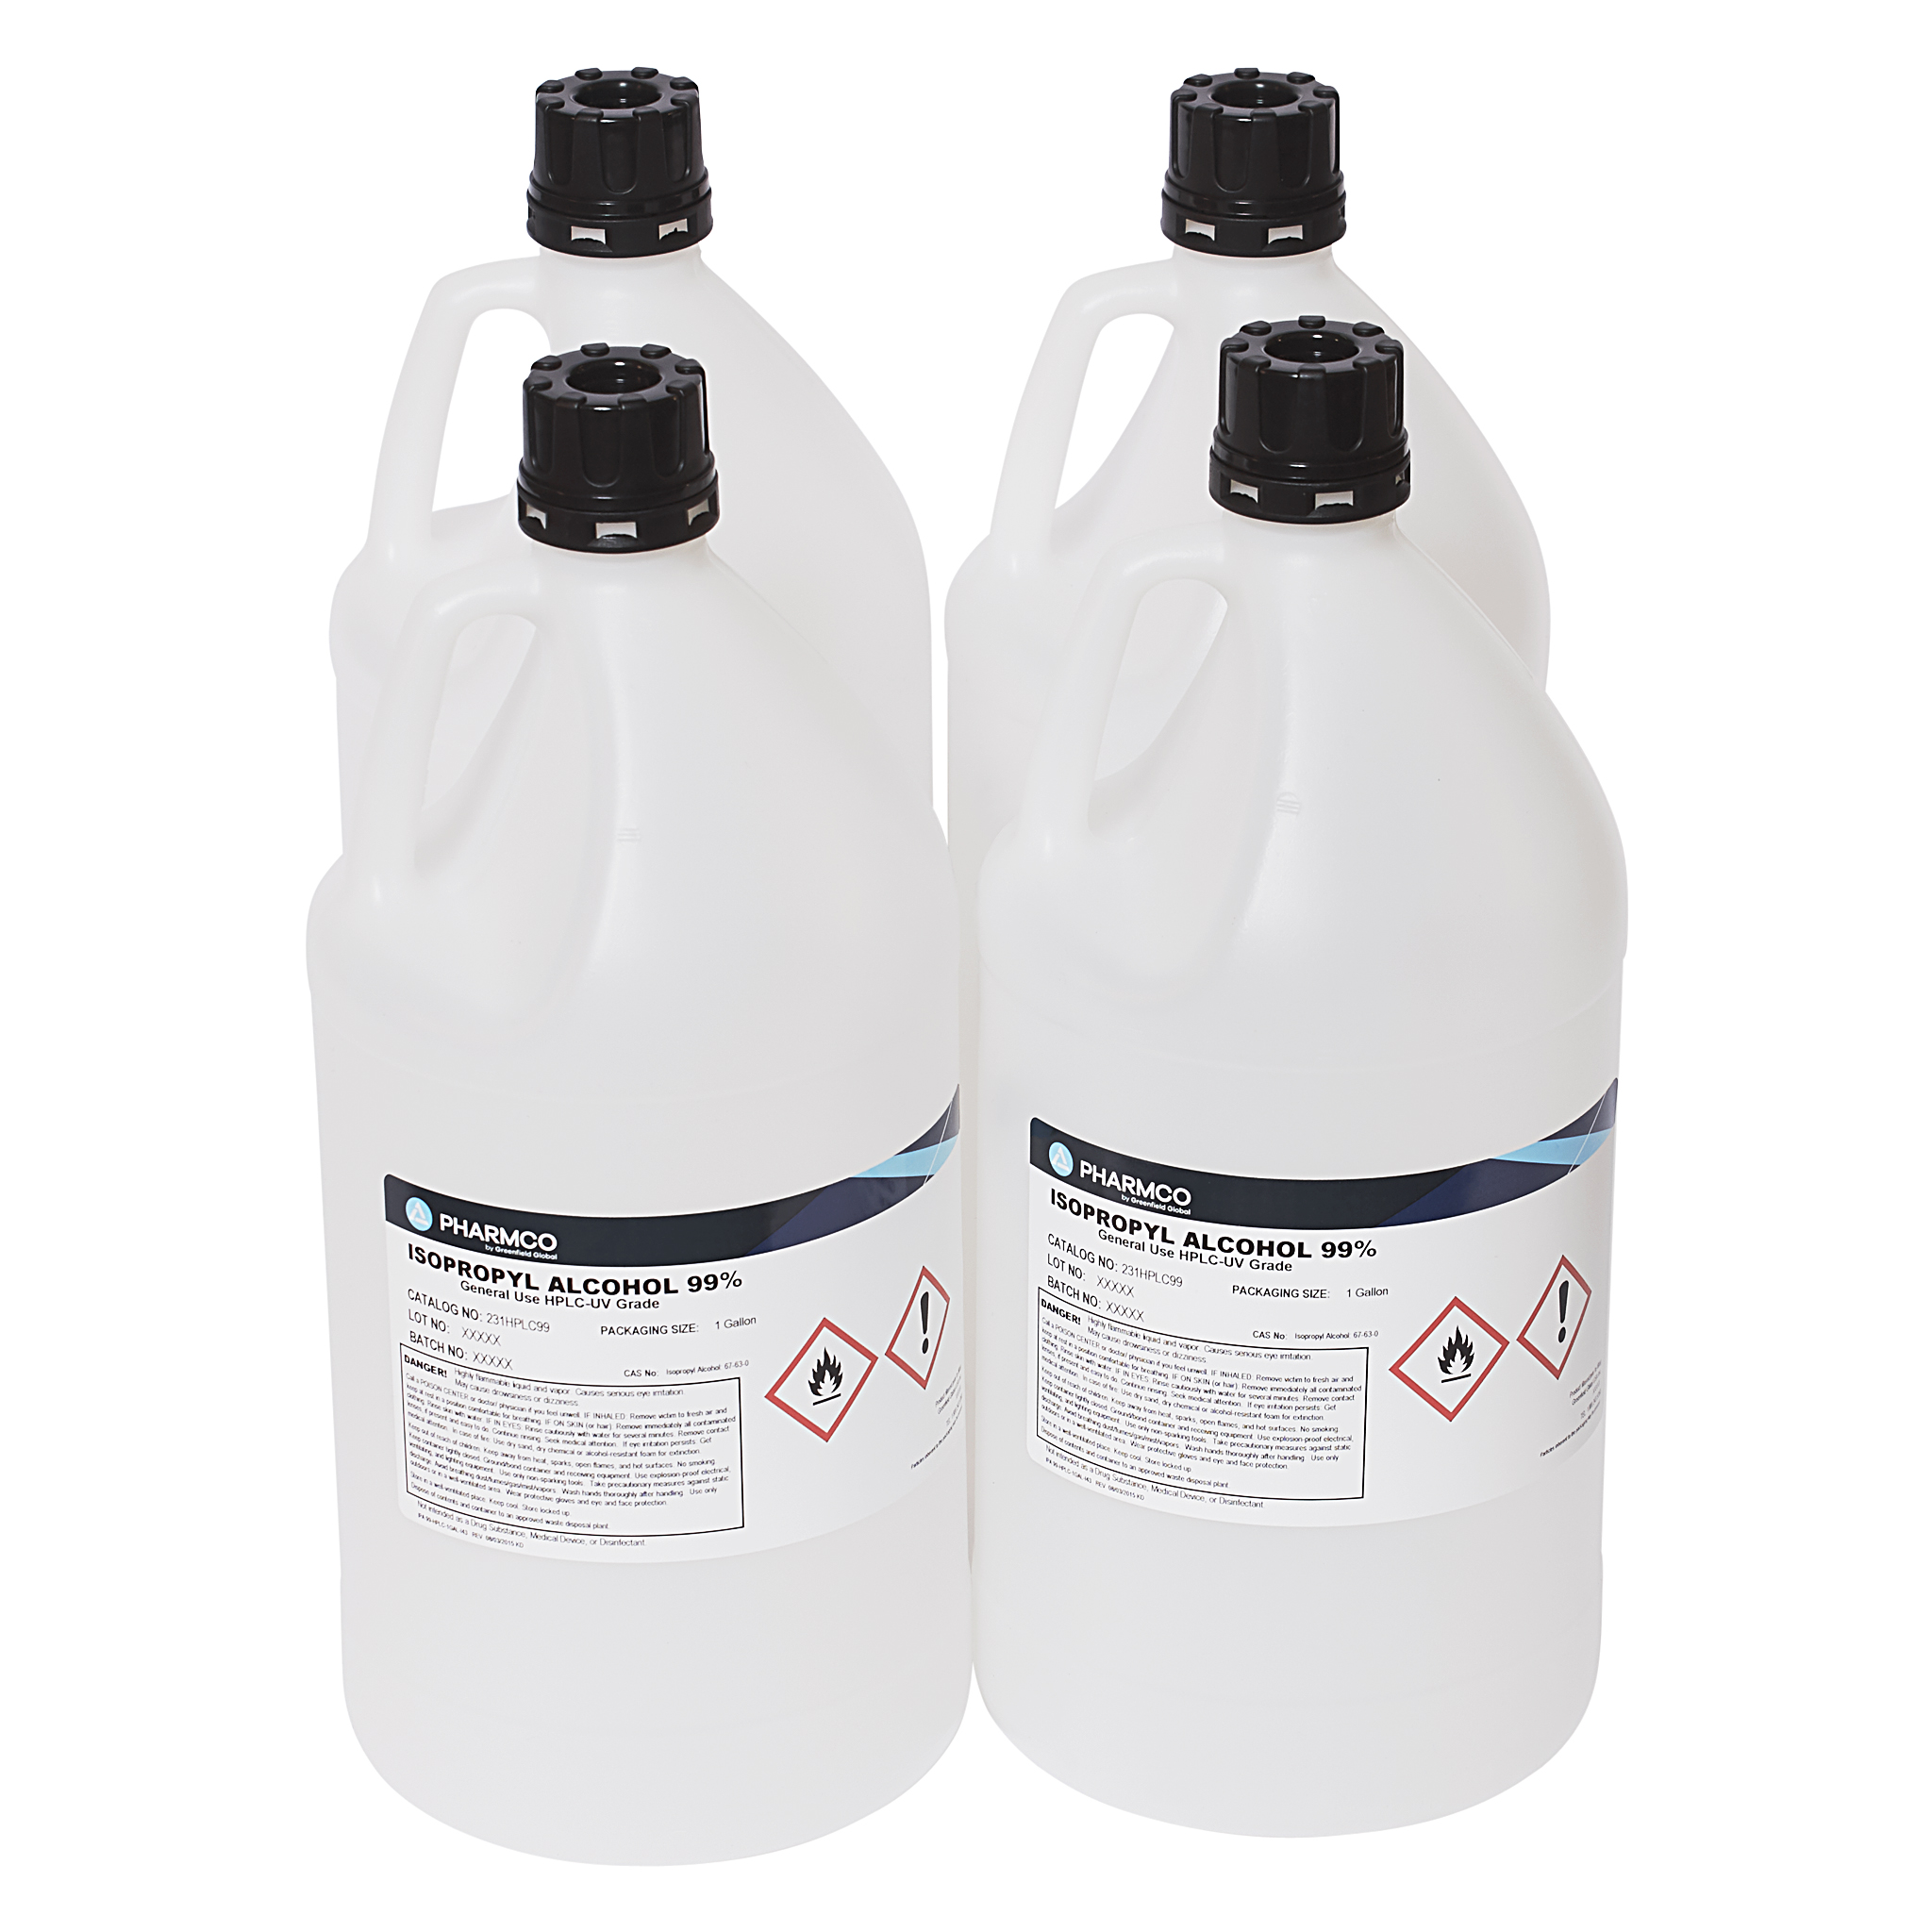 CleanPro® 99% IPA Isopropyl Alchohol, Case of 4 Gallons